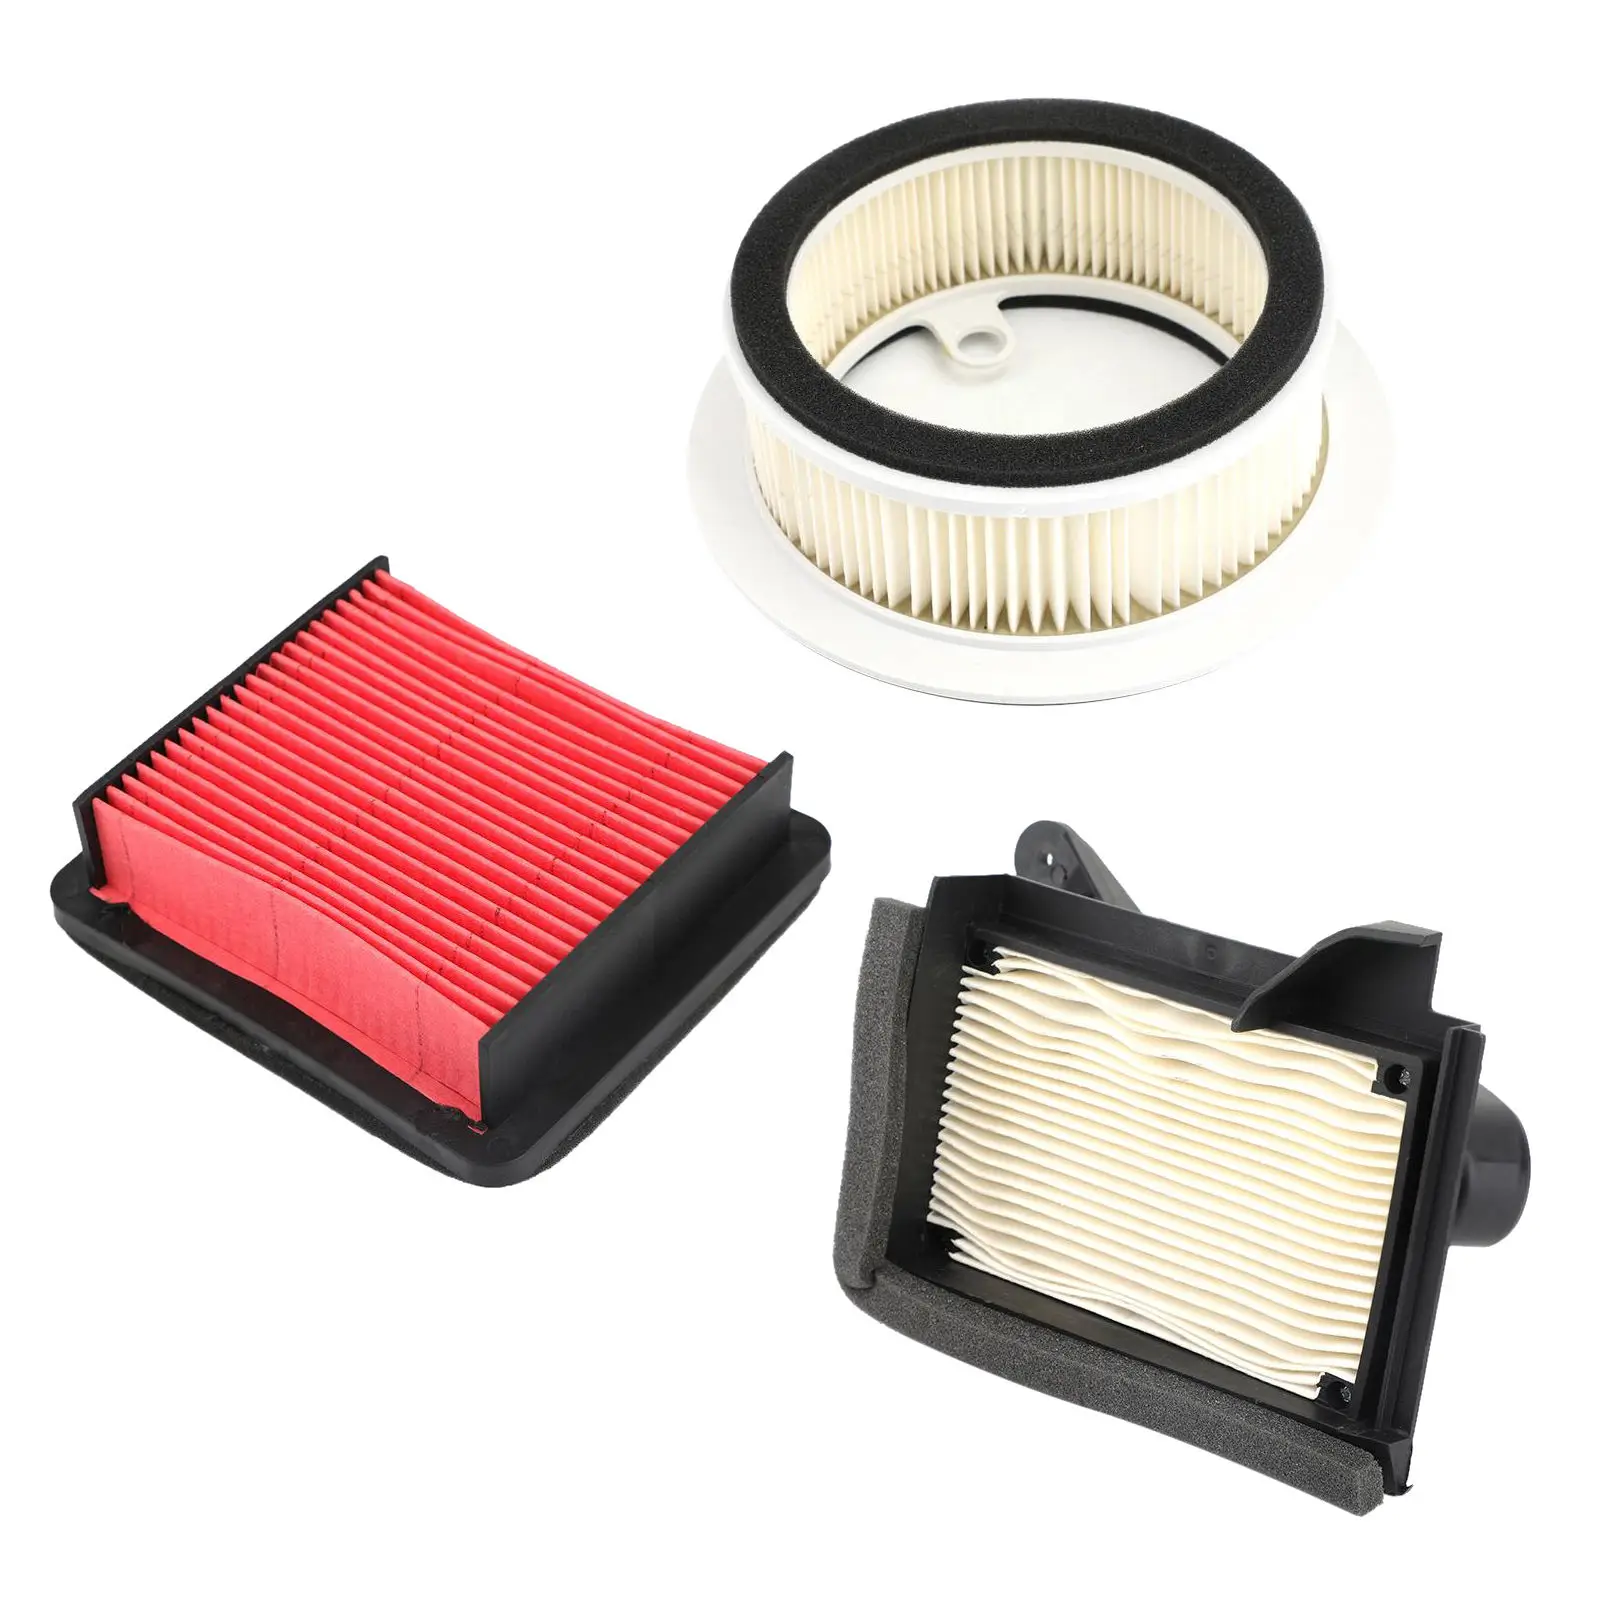 3x High Performance Motorbike Air Filter Fit for Yamaha XP 530 TMAX 530 SX DX 2017 2018 2019